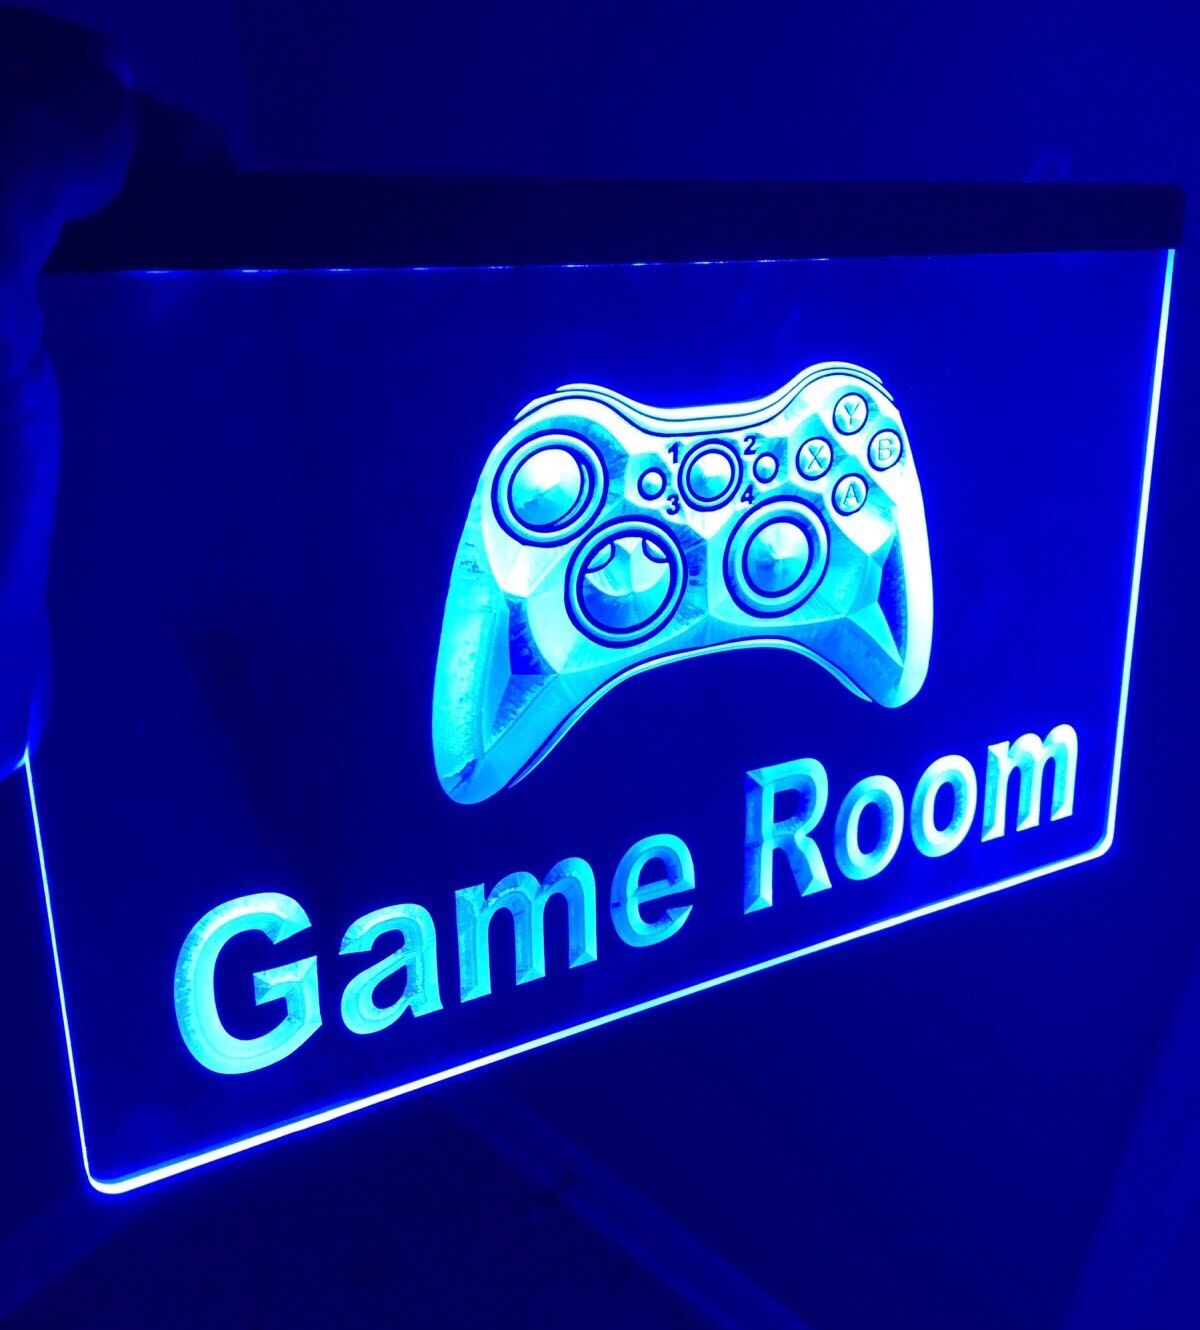 GAME ROOM LED Light Neon Sign for Game Room,Office,Bar,Man Cave, Arcade Room.